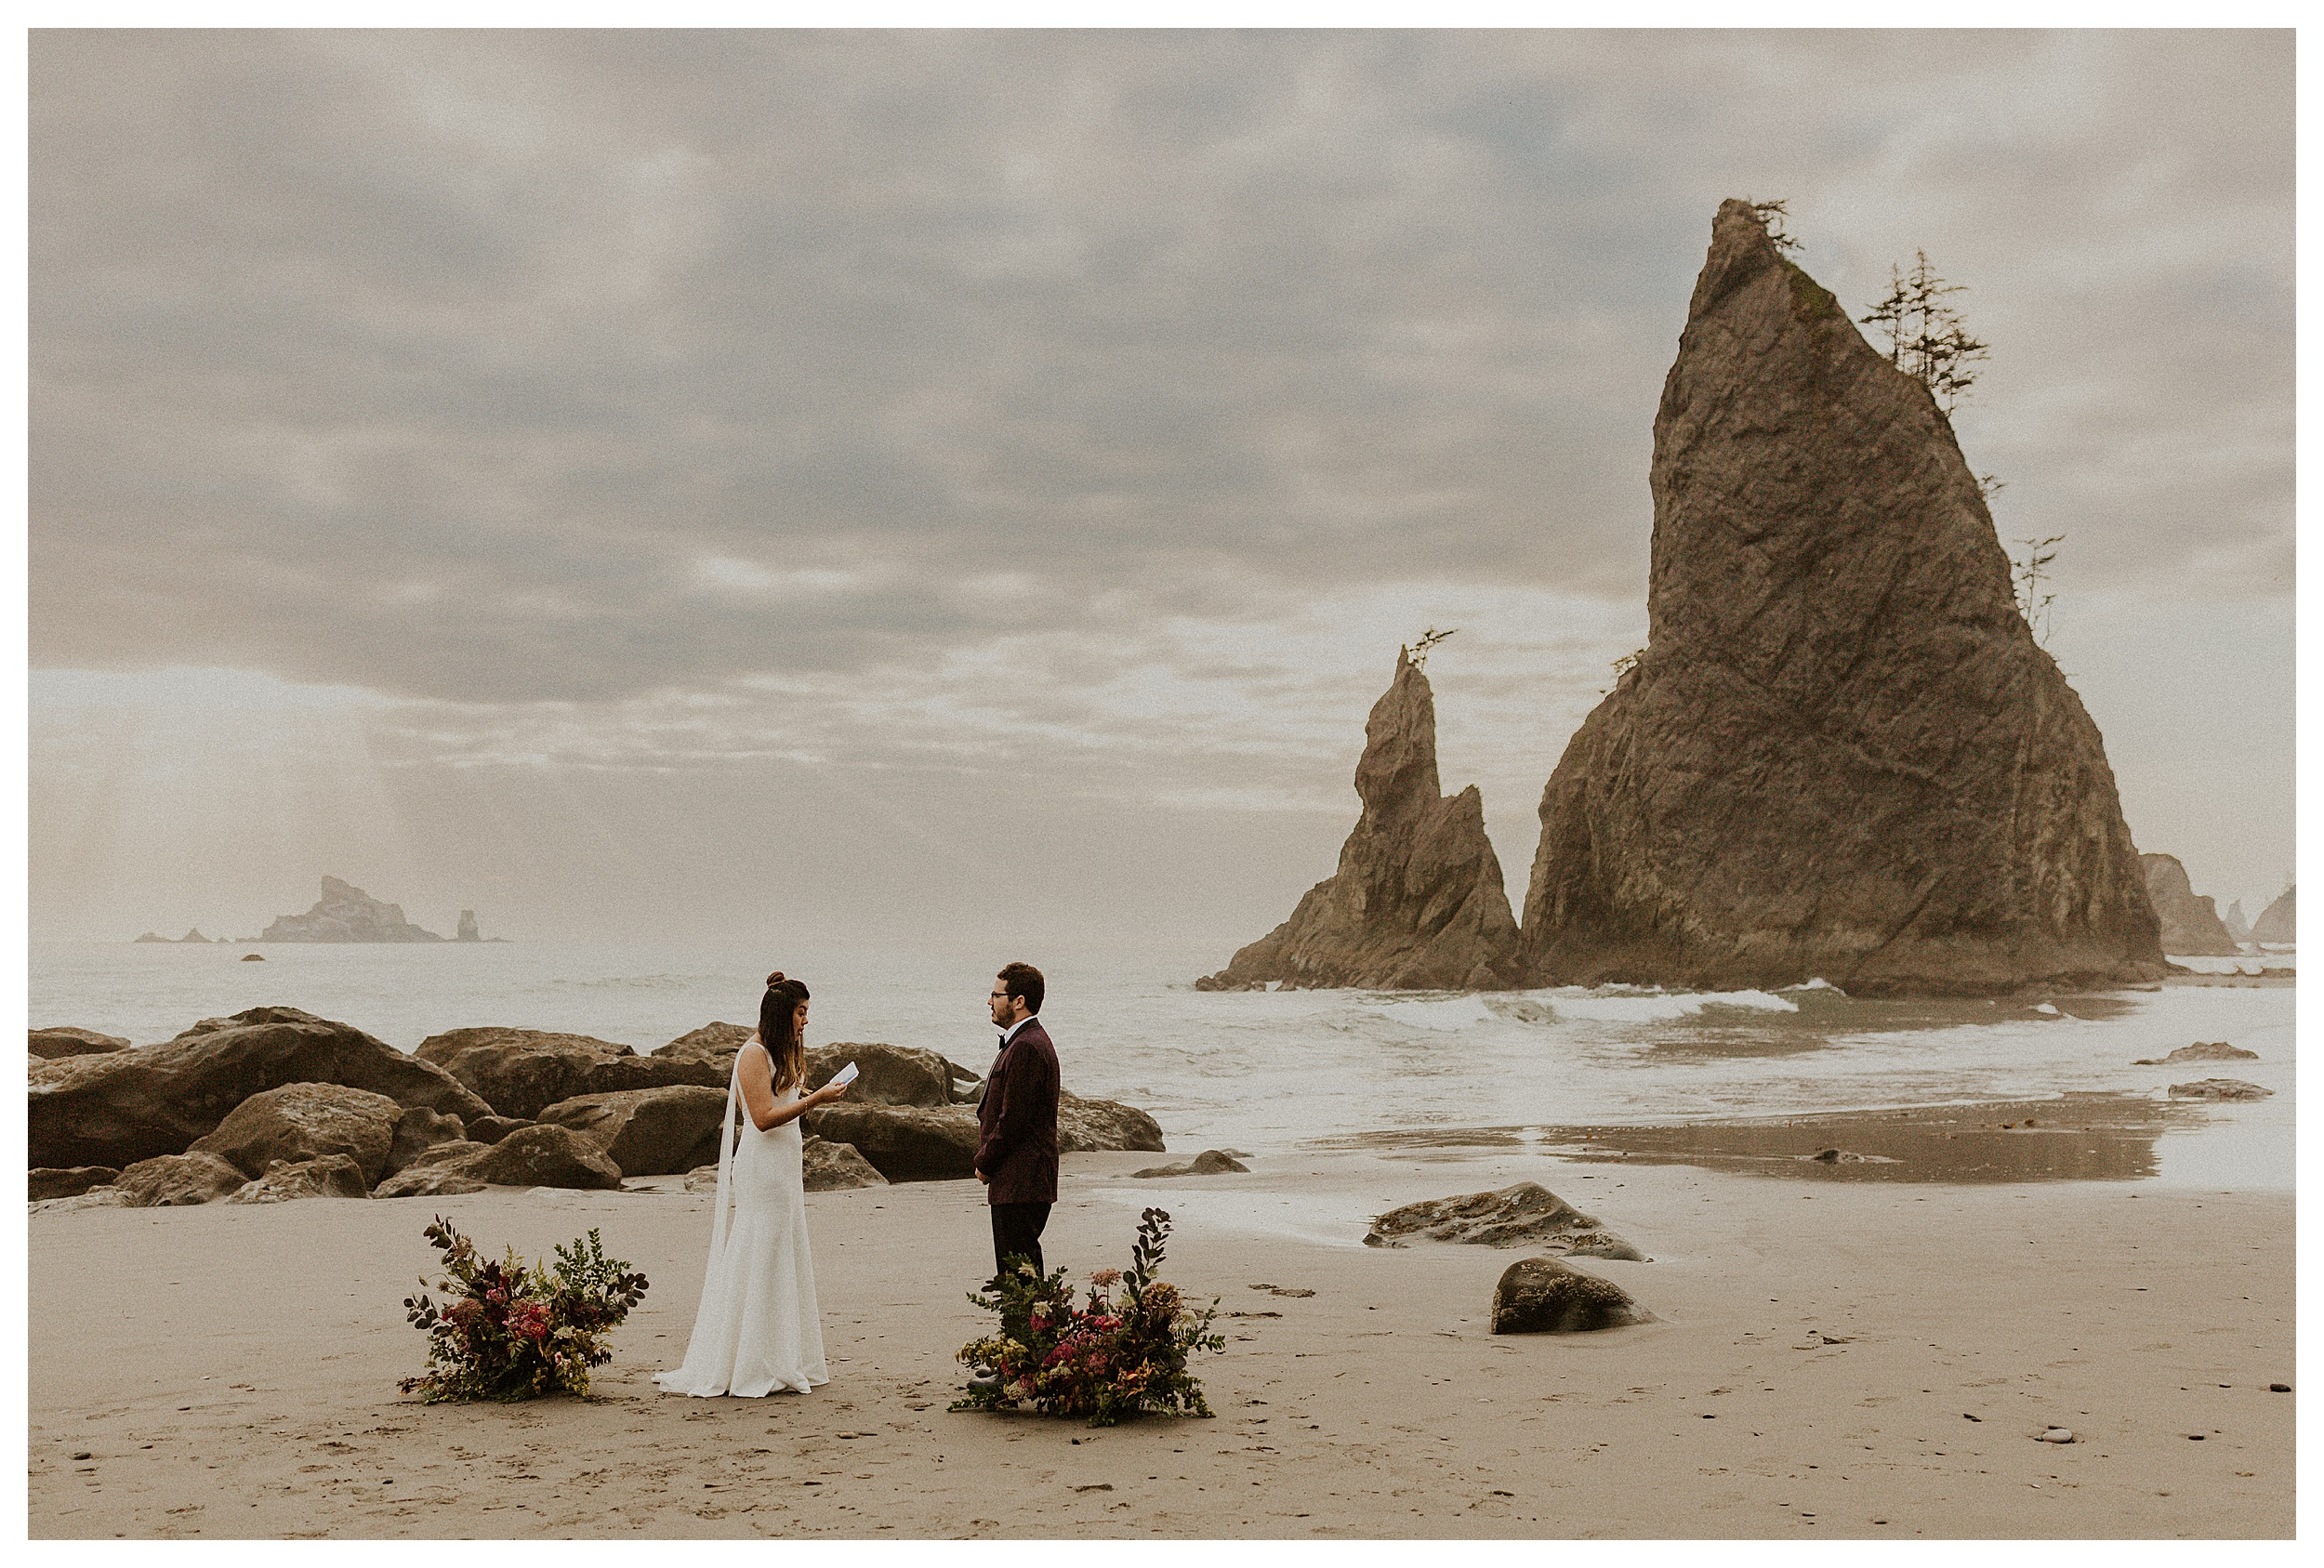 bride and groom reading vows olympic national park coastal landscape
